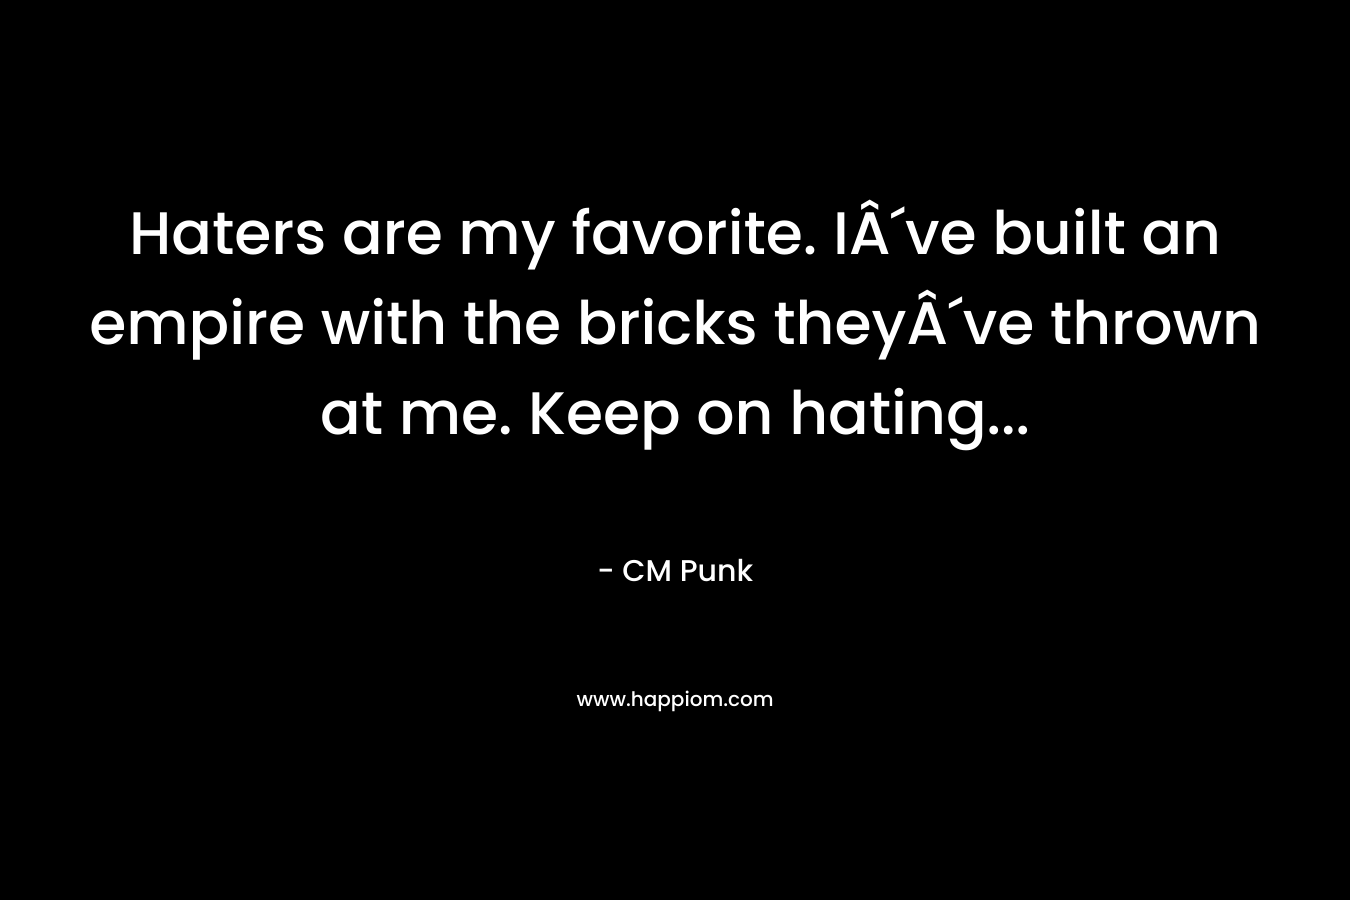 Haters are my favorite. IÂ´ve built an empire with the bricks theyÂ´ve thrown at me. Keep on hating...